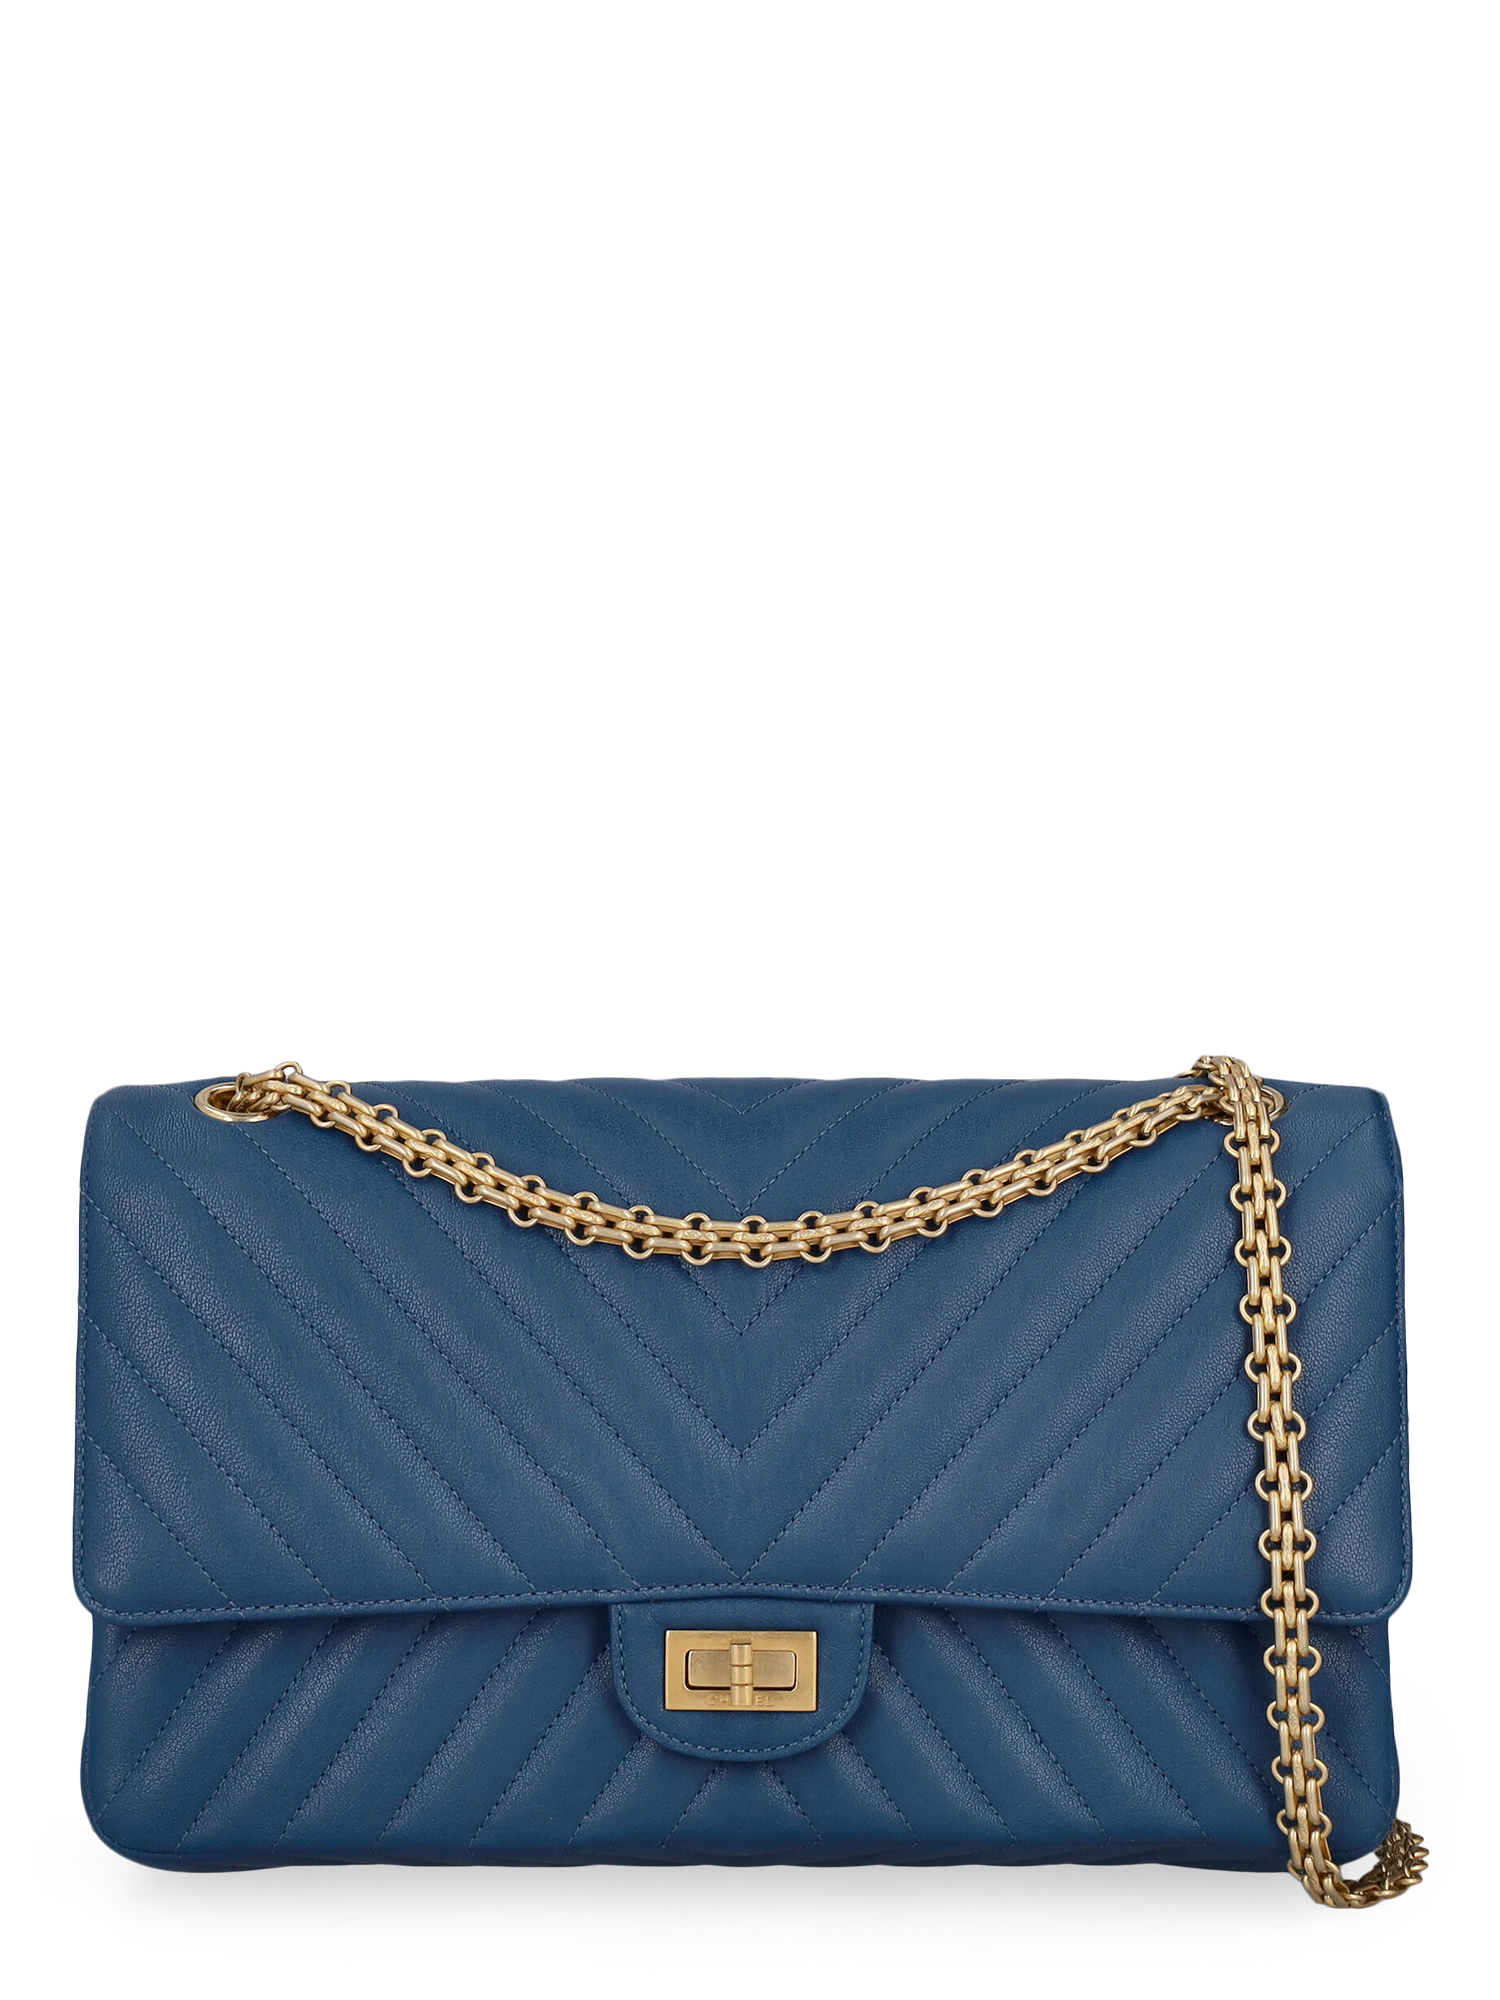 Pre-owned Chanel Women's Shoulder Bags -  - In Navy Leather